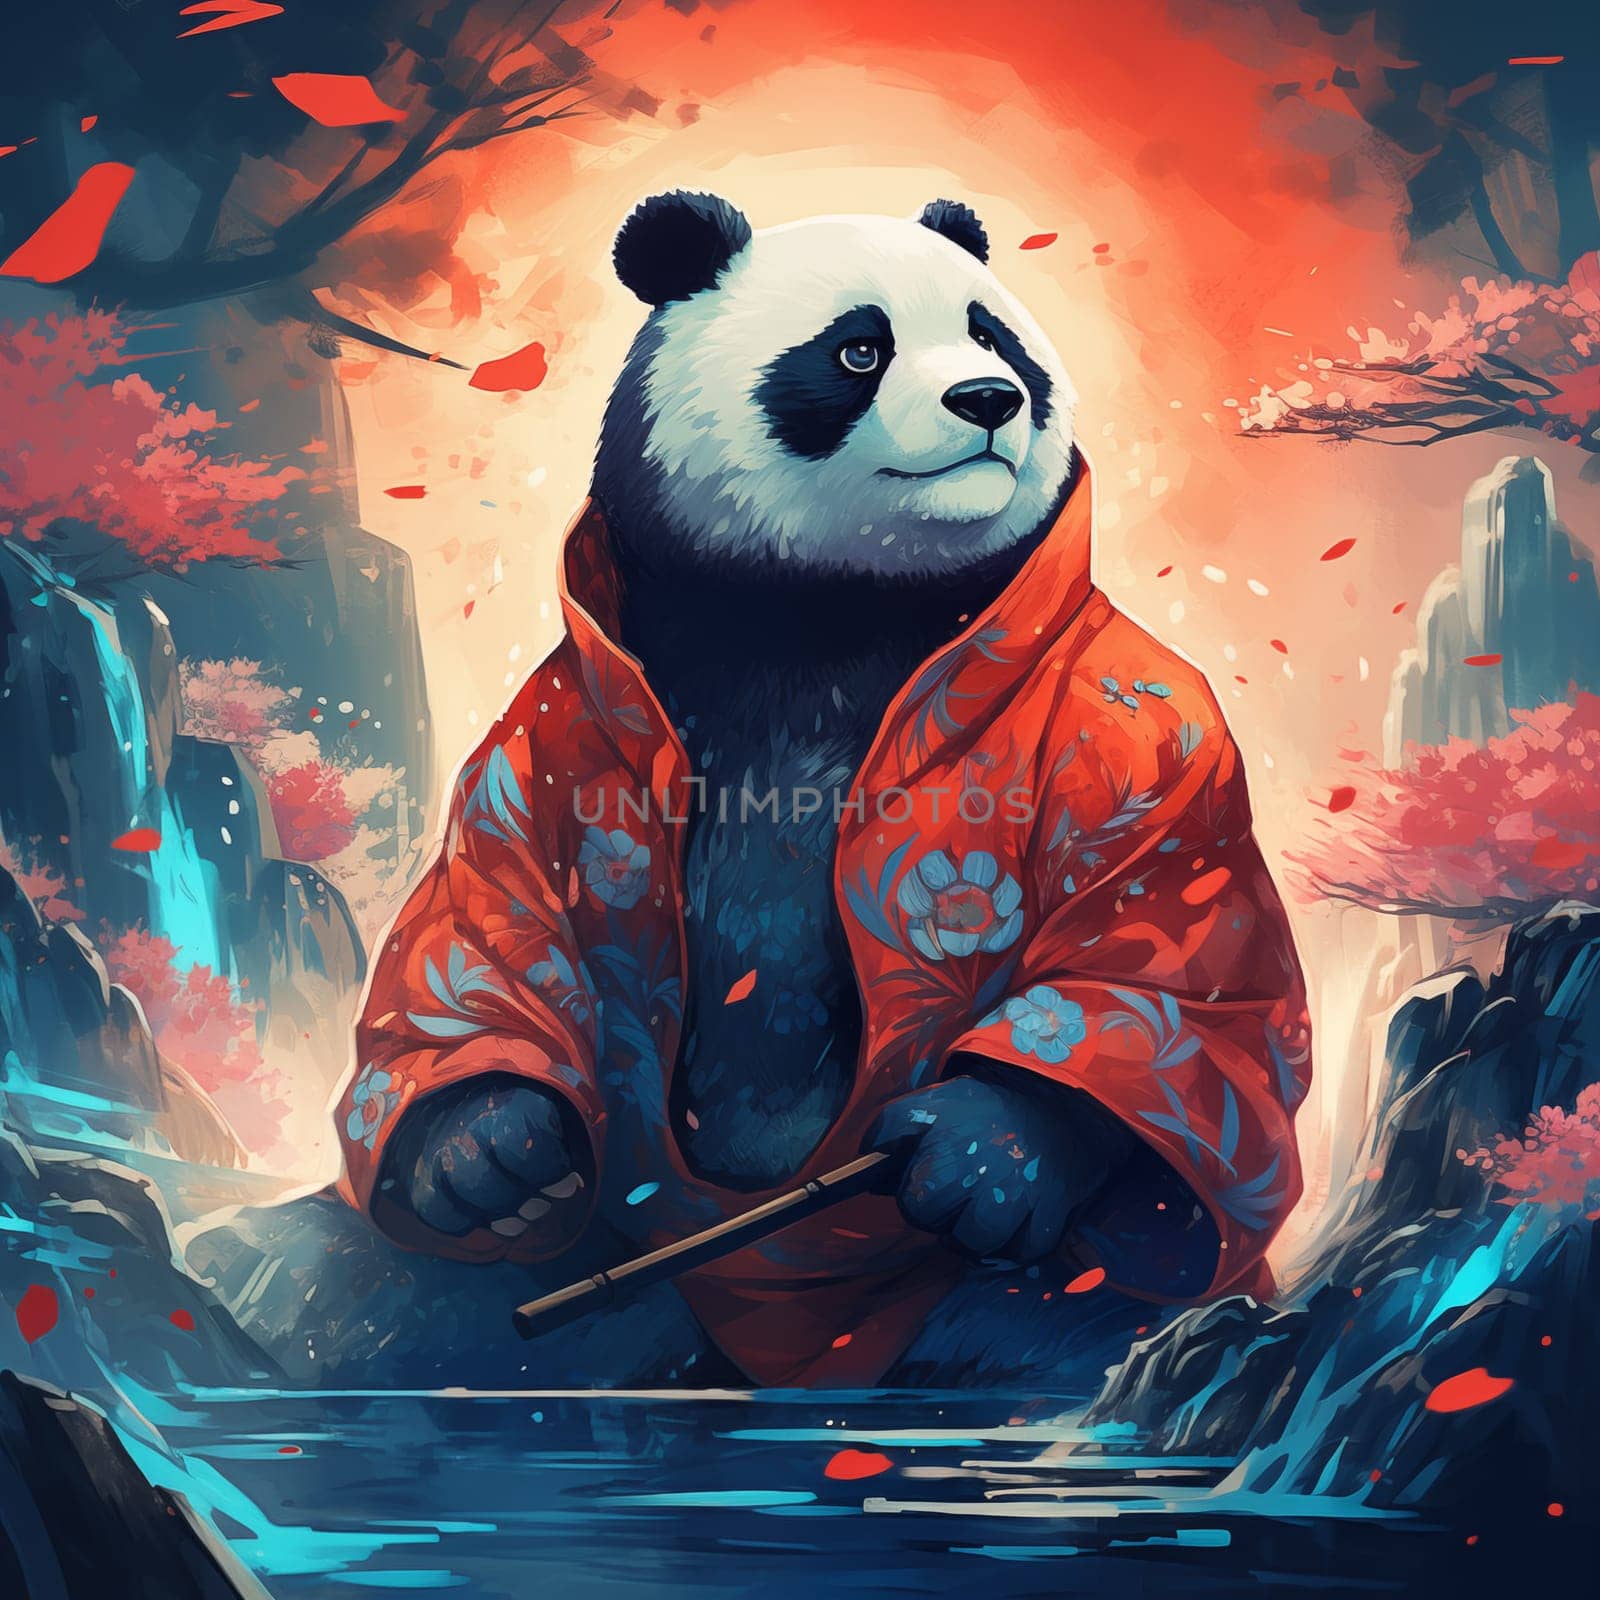 Illustration of a Panda in a Red National Robe. by Rina_Dozornaya